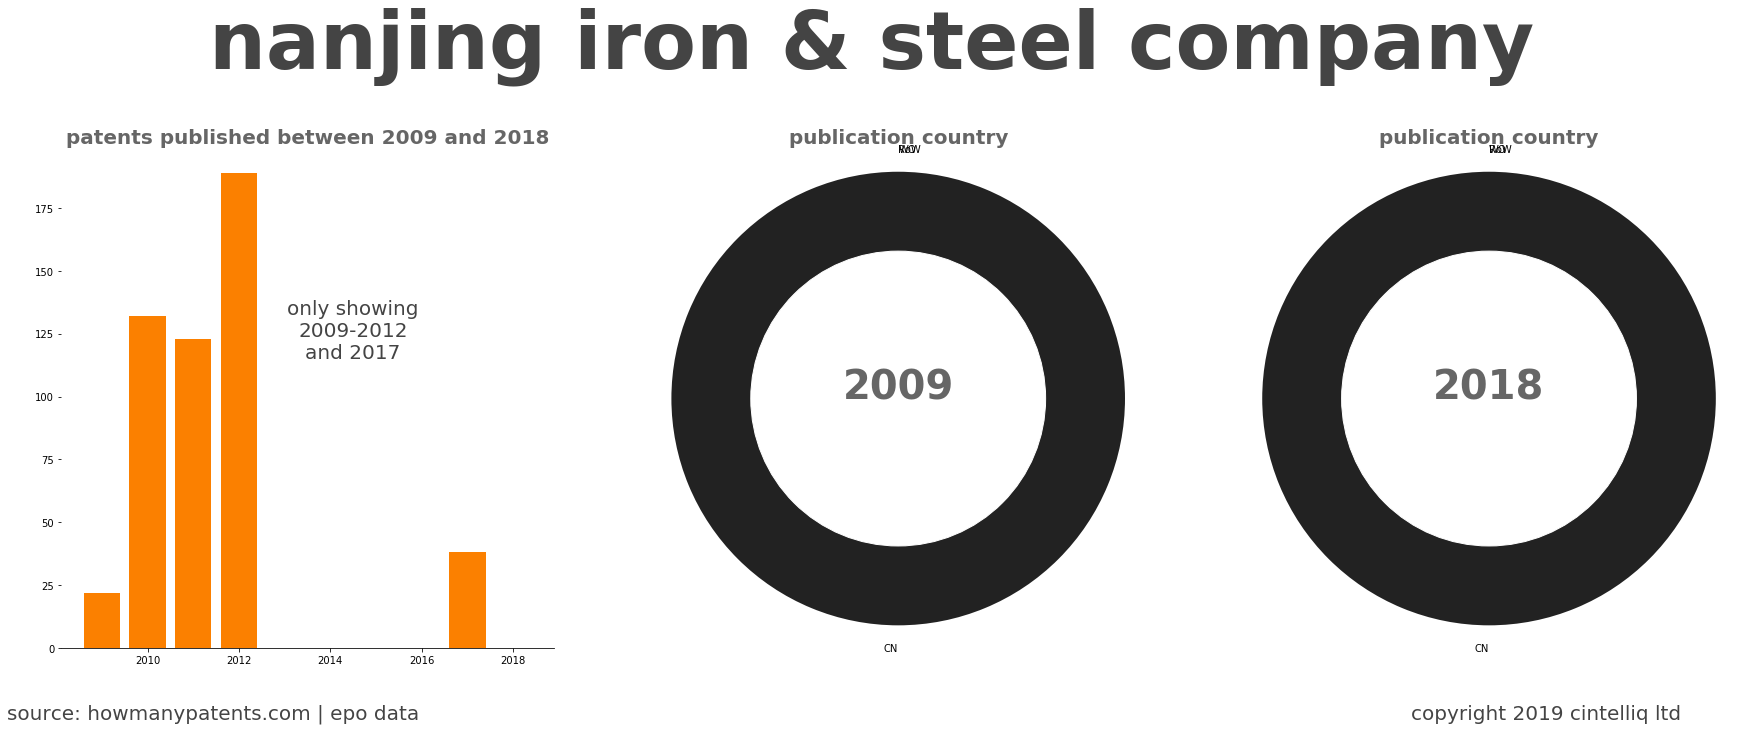 summary of patents for Nanjing Iron & Steel Company